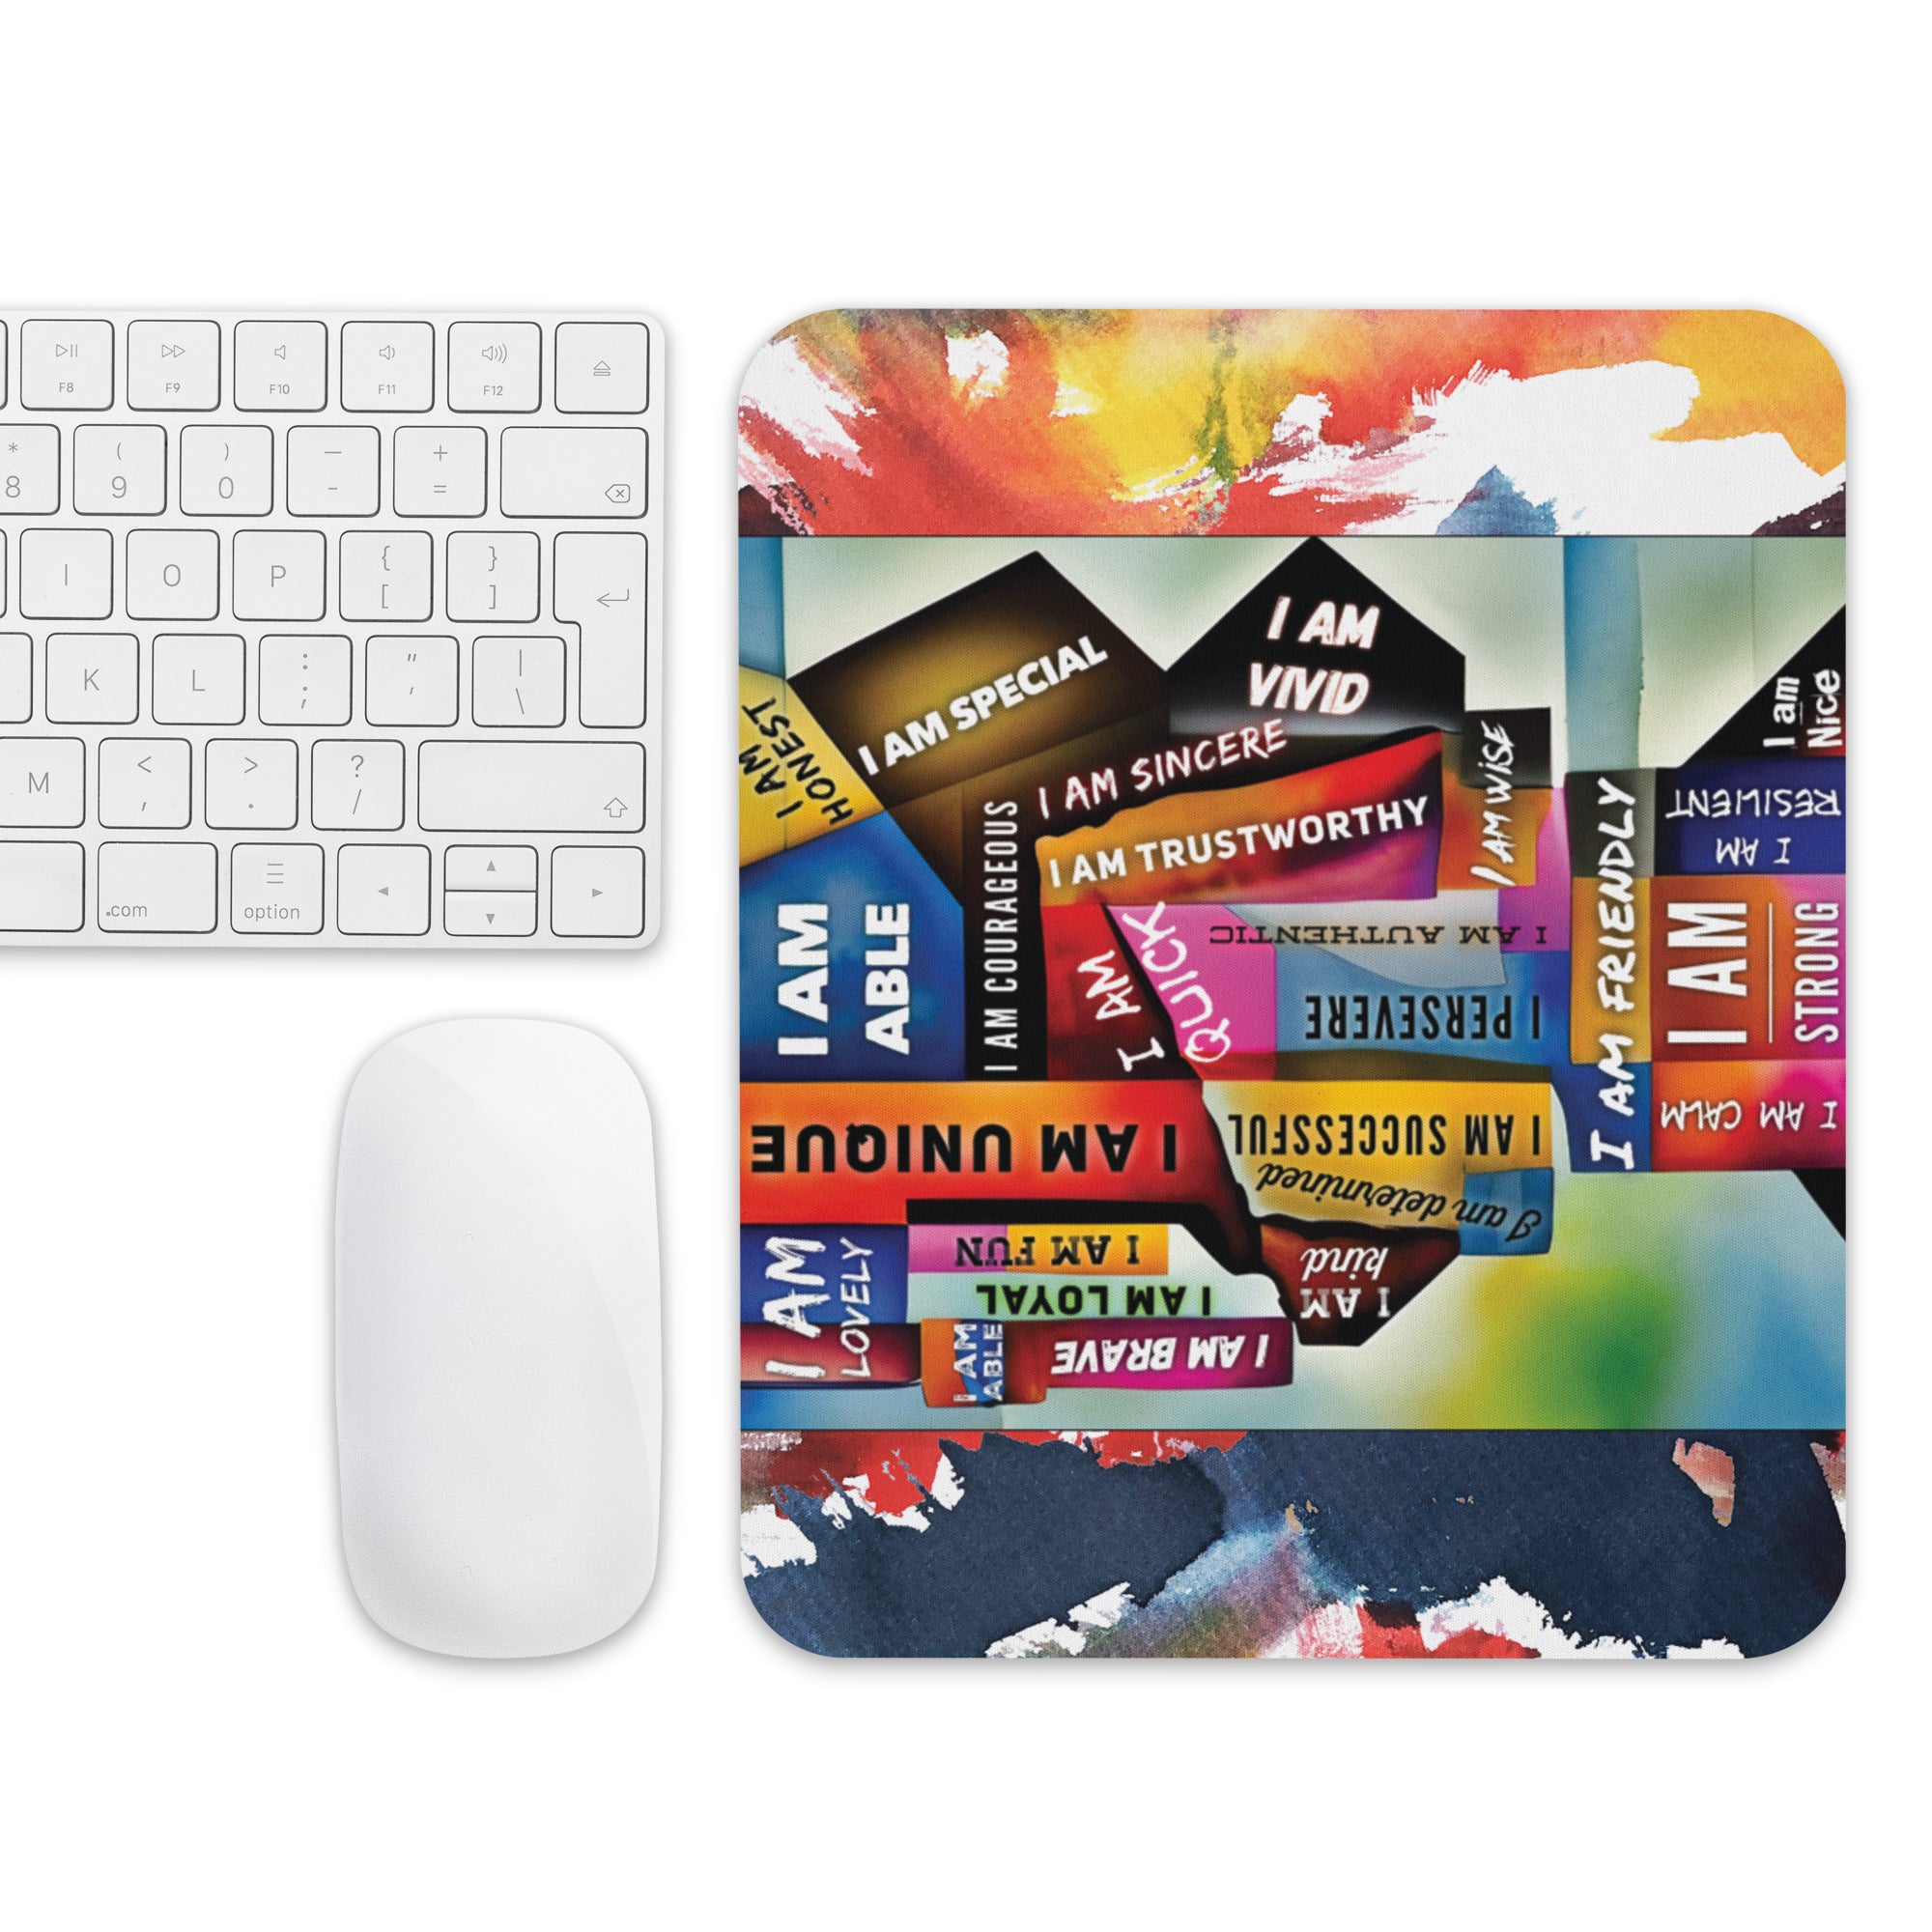 GloWell Designs - Mouse Pad - Affirmation Quote - I Am - GloWell Designs